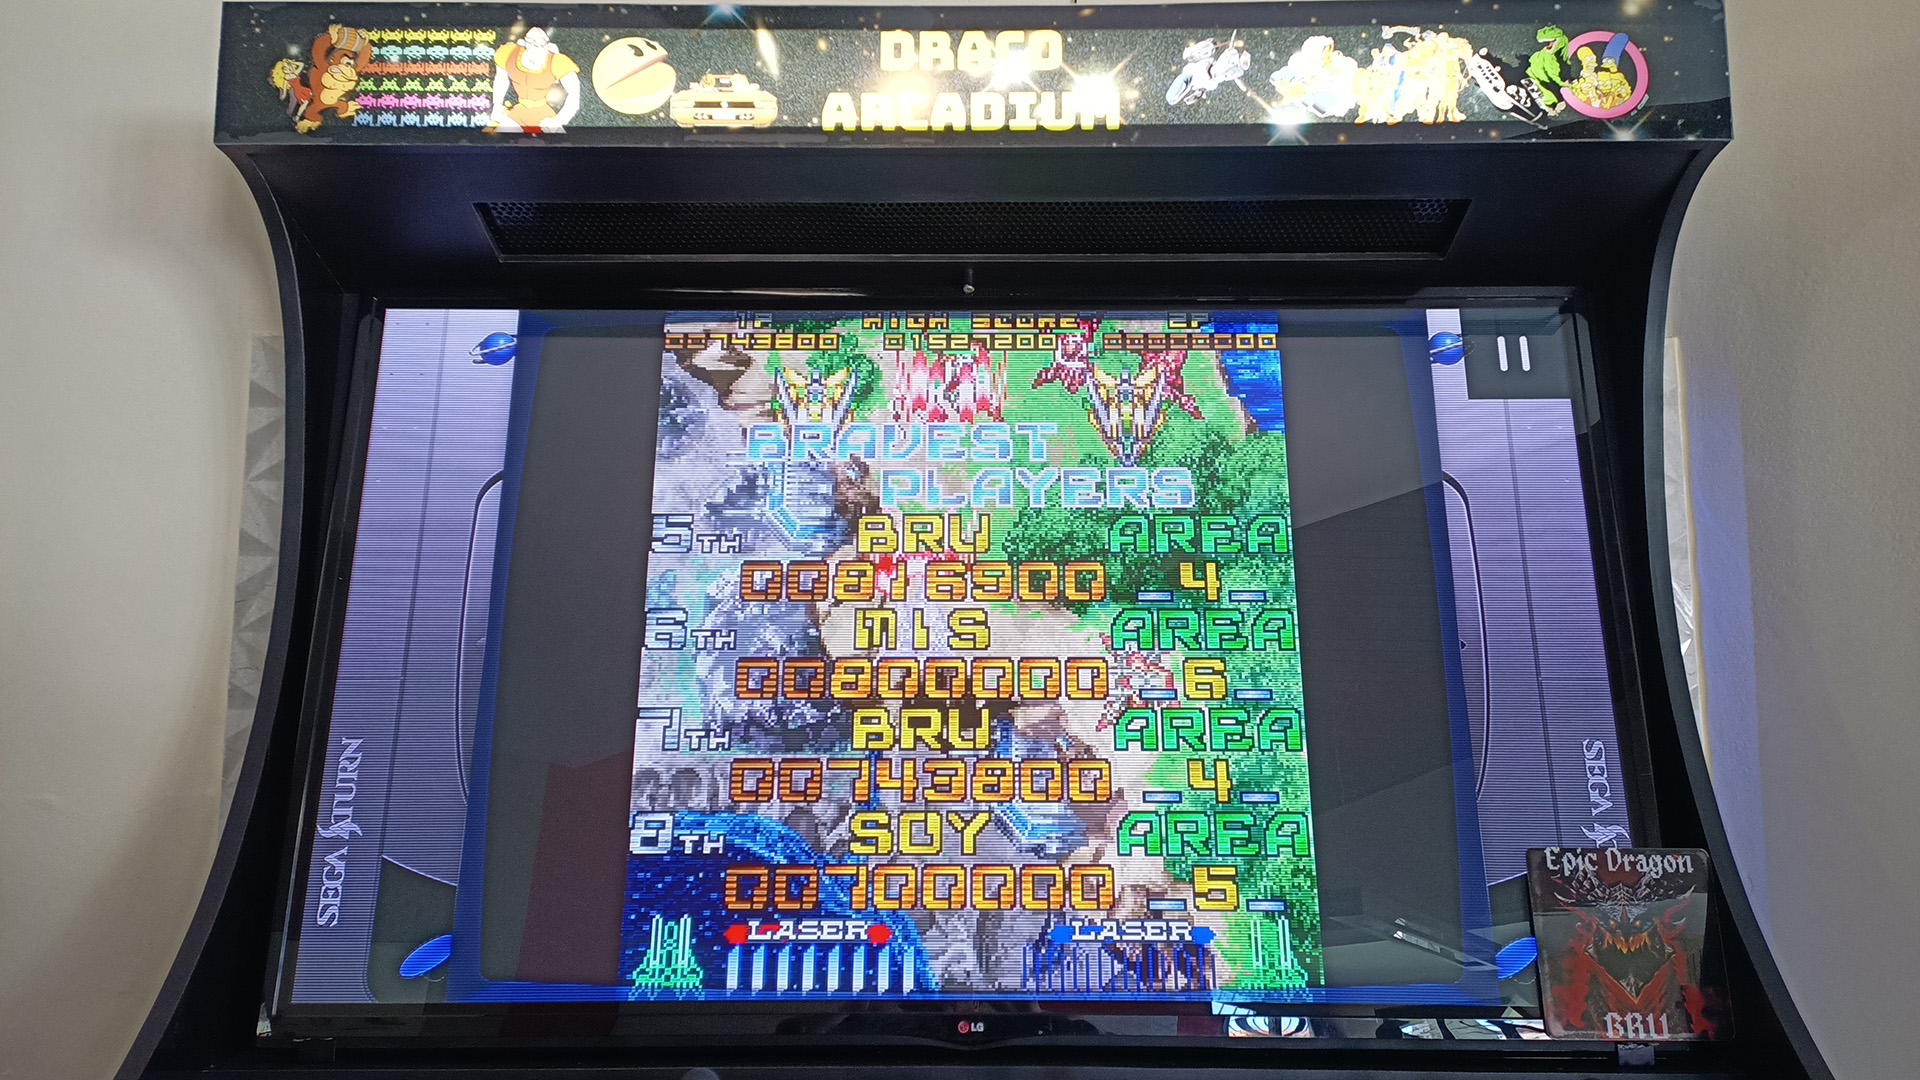 EpicDragon: Galactic Attack: Hard 1 (Sega Saturn Emulated) 816,900 points on 2022-08-14 14:46:24